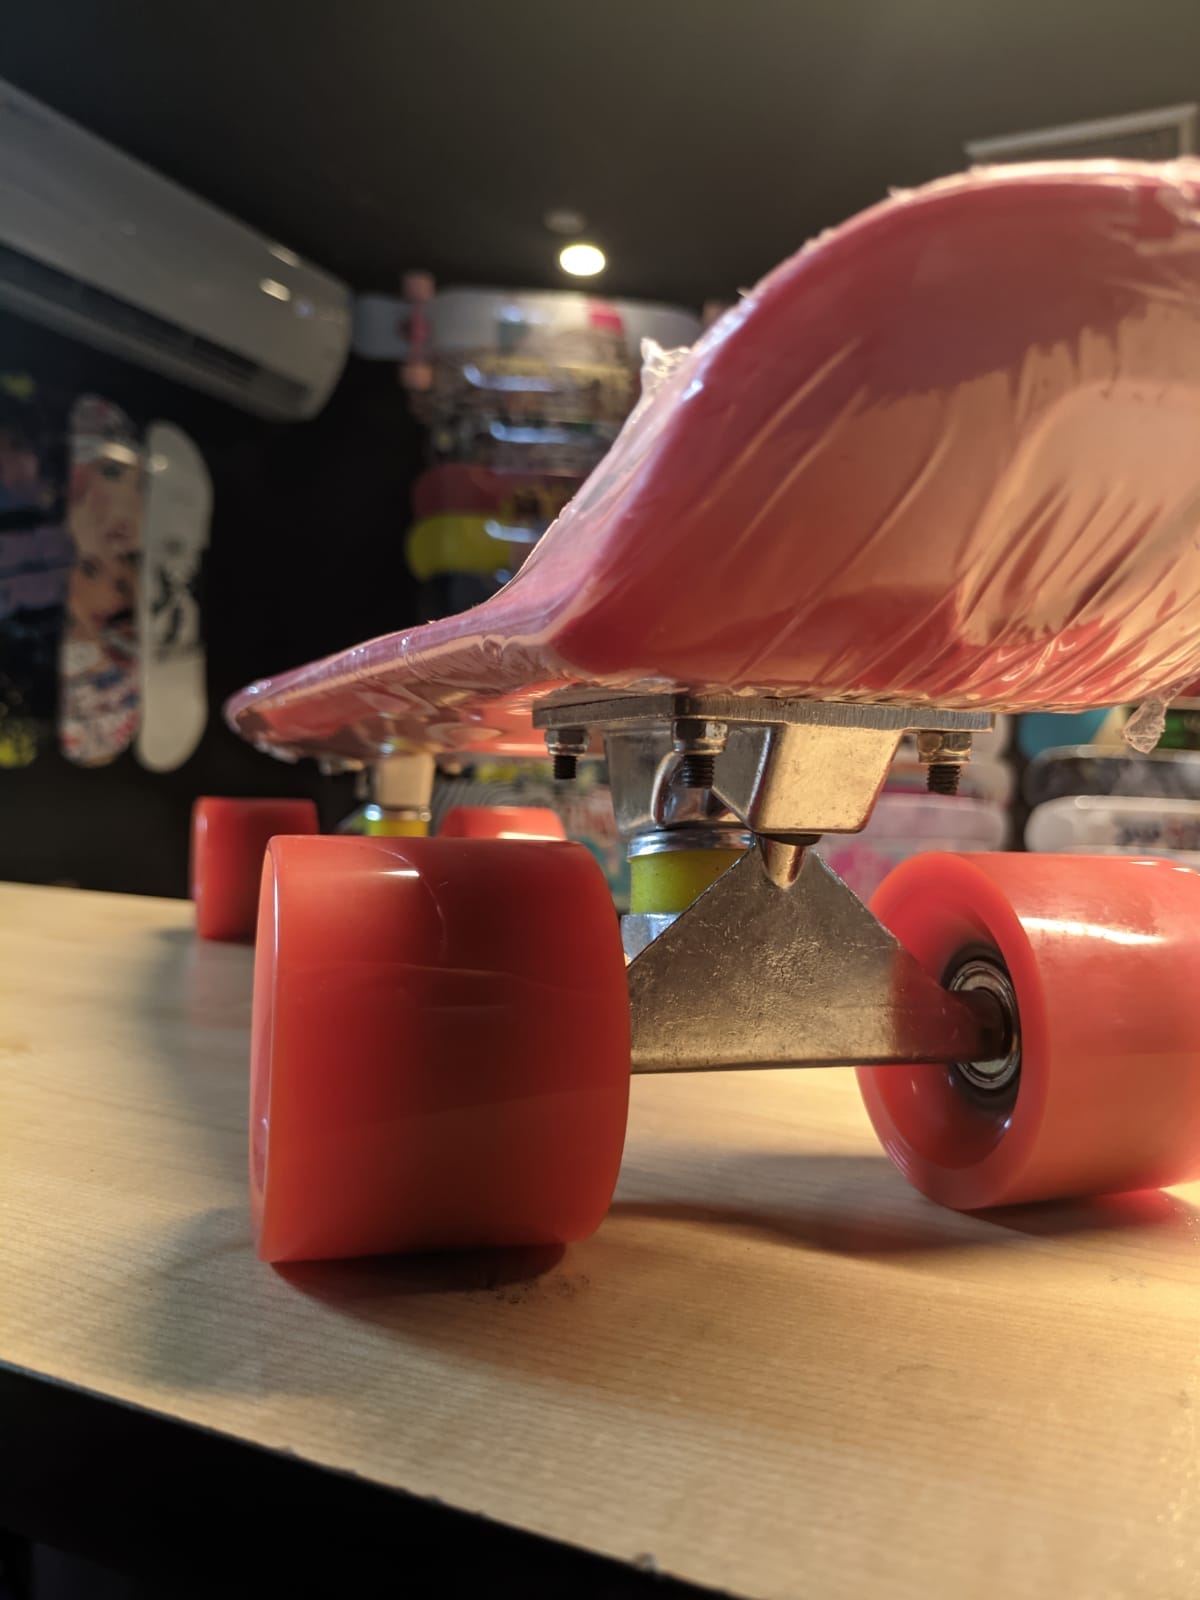 The penny boards offer a lot of advantages that suit many people. However, authentic penny boards cost higher than local ones.